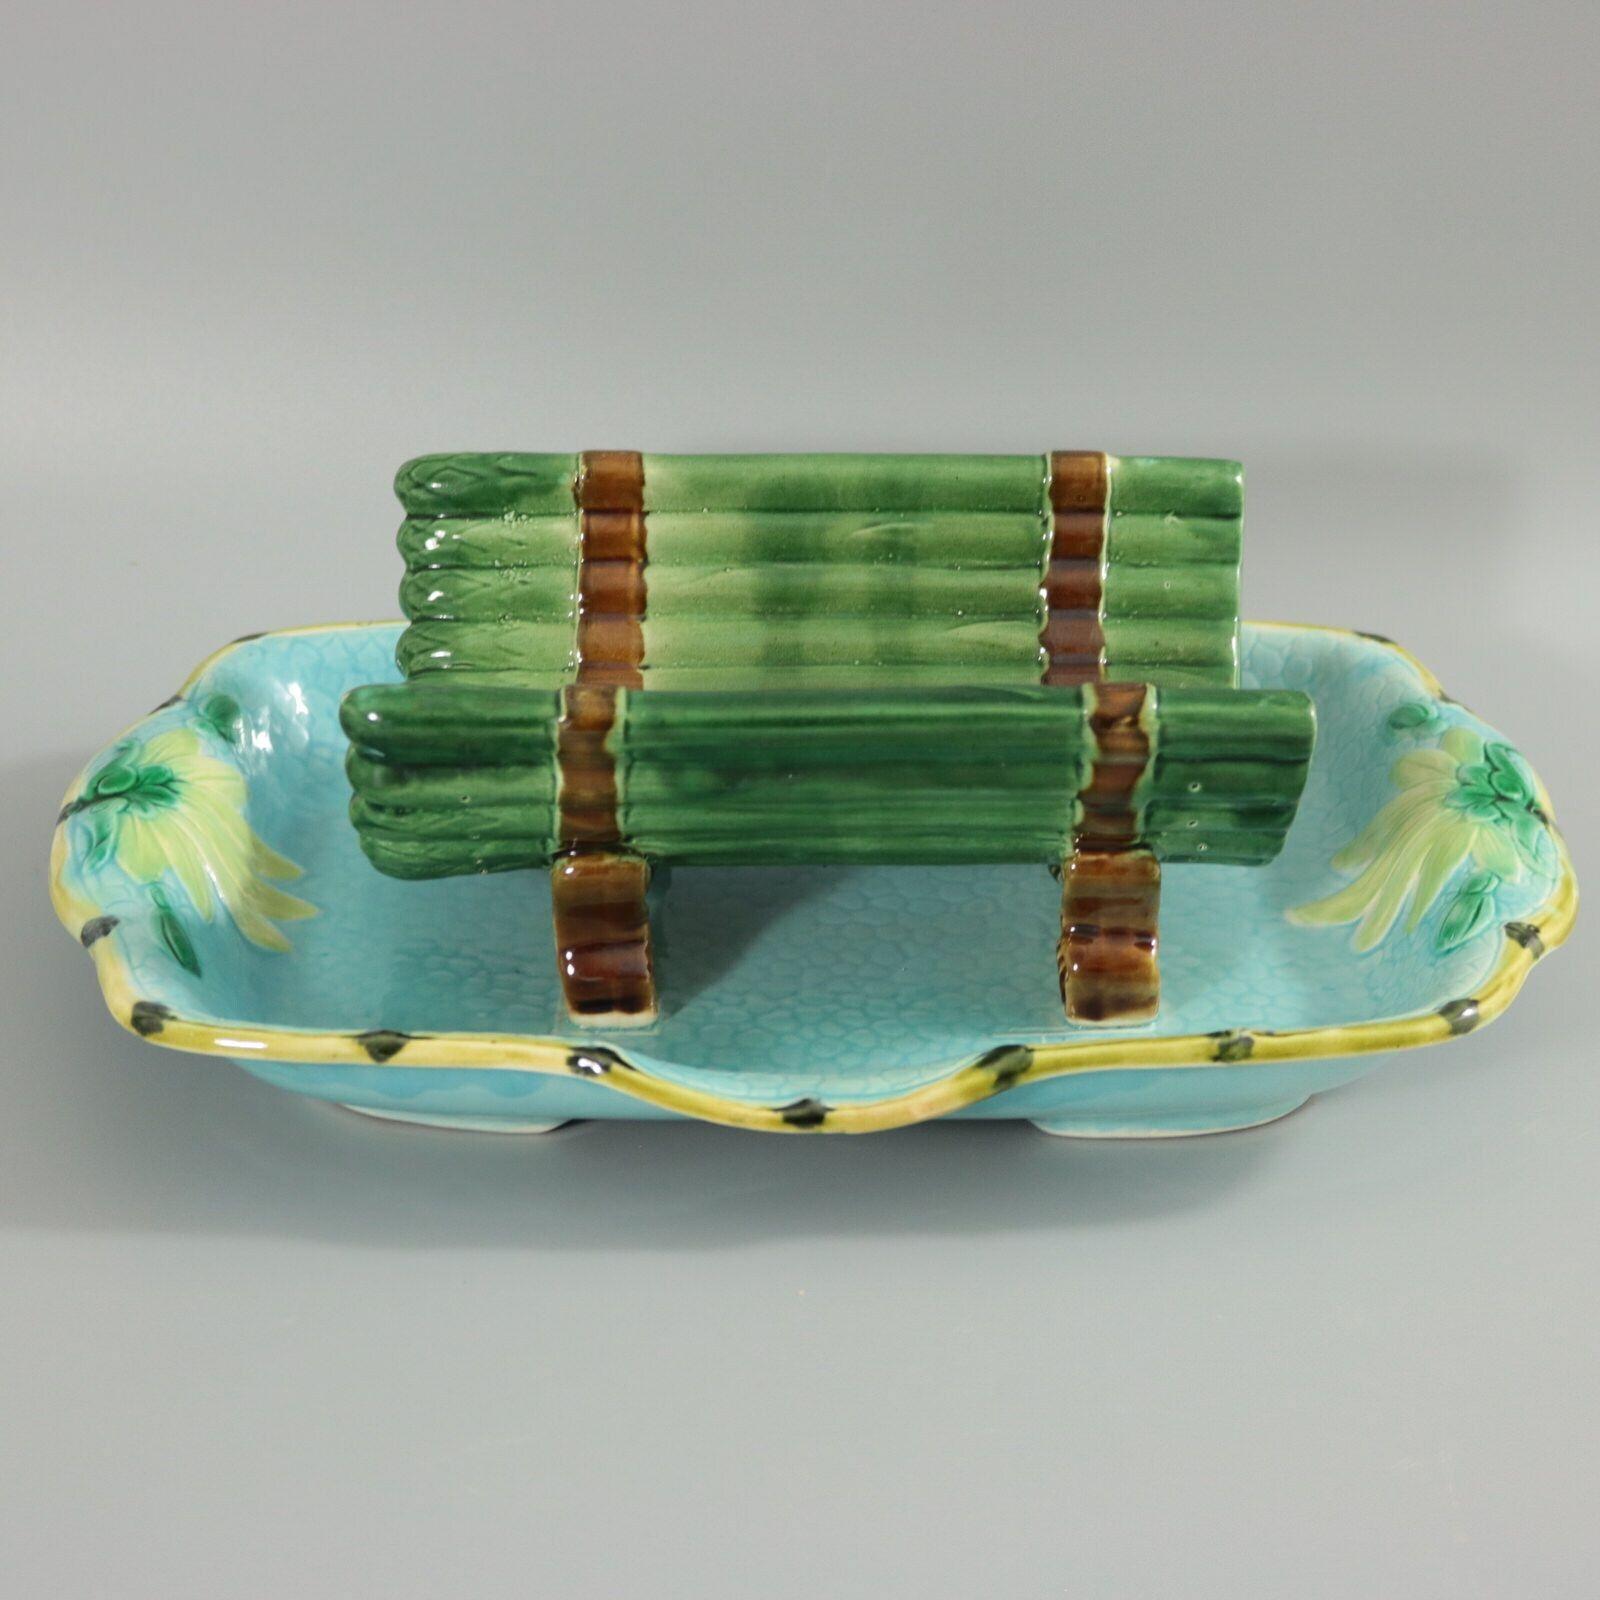 Joseph Holdcroft Majolica Asparagus Server In Good Condition For Sale In Chelmsford, Essex